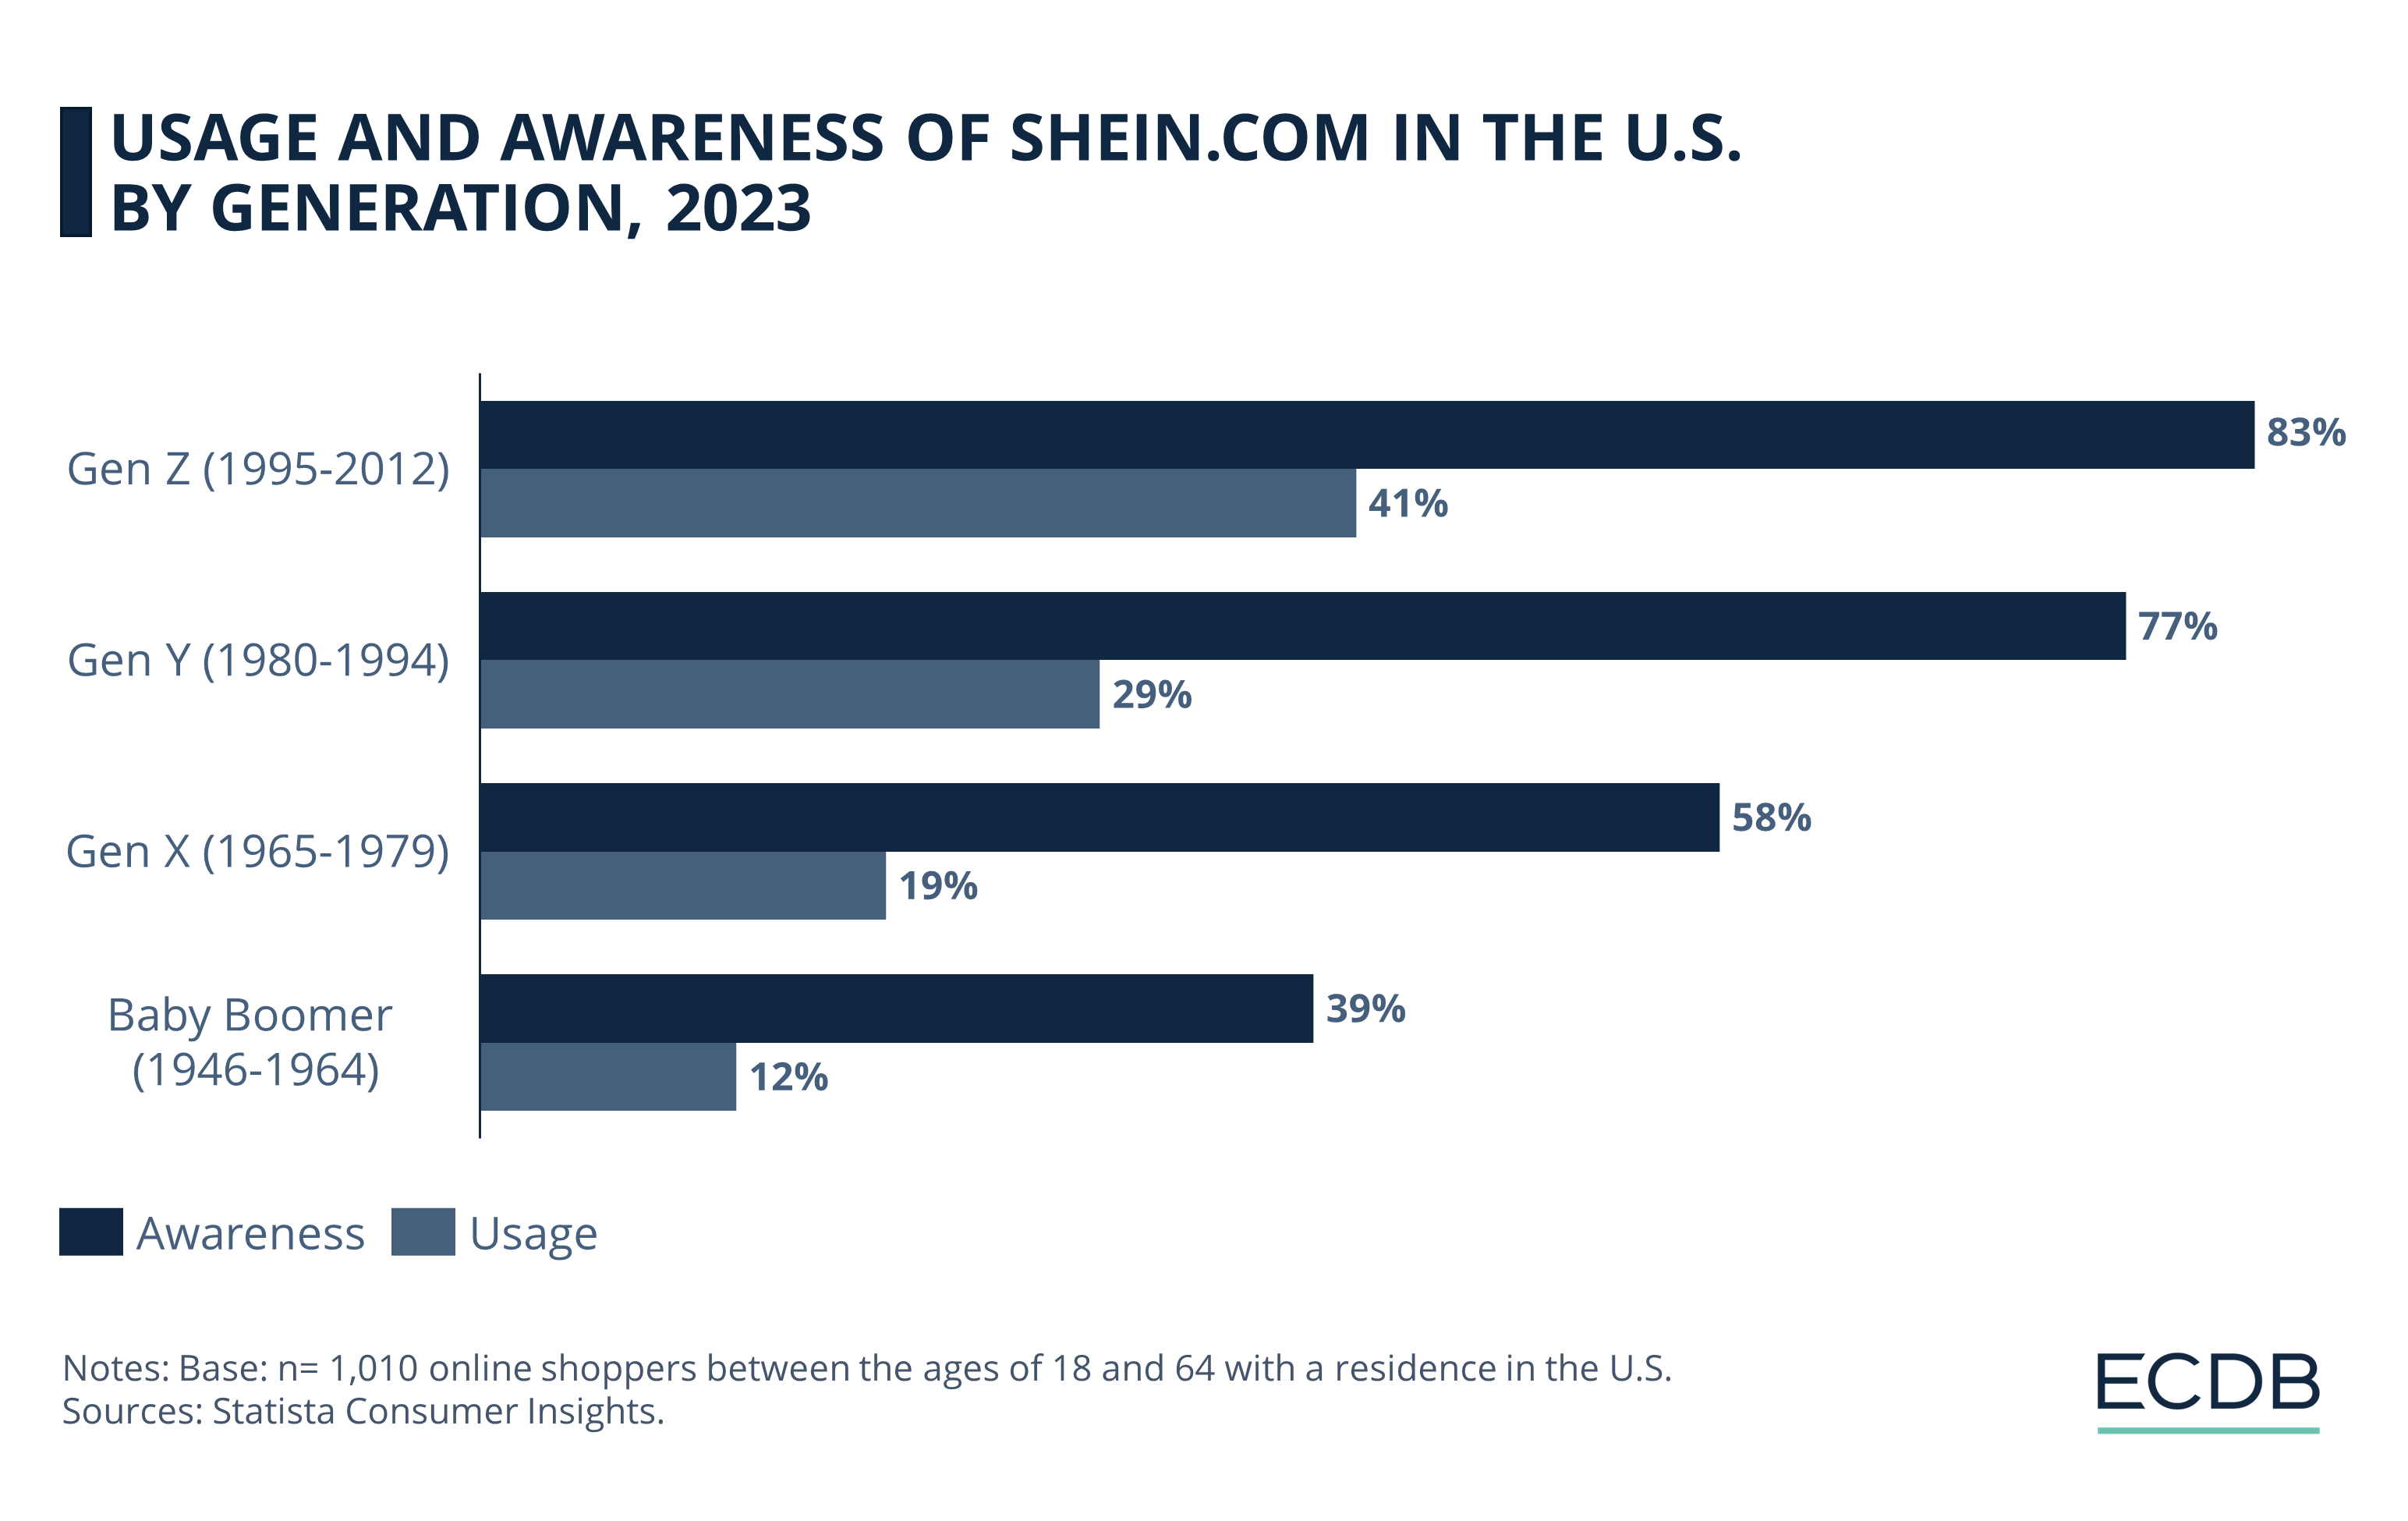 Usage and Awareness of Shein.com Among U.S. Consumers by Generation, 2023